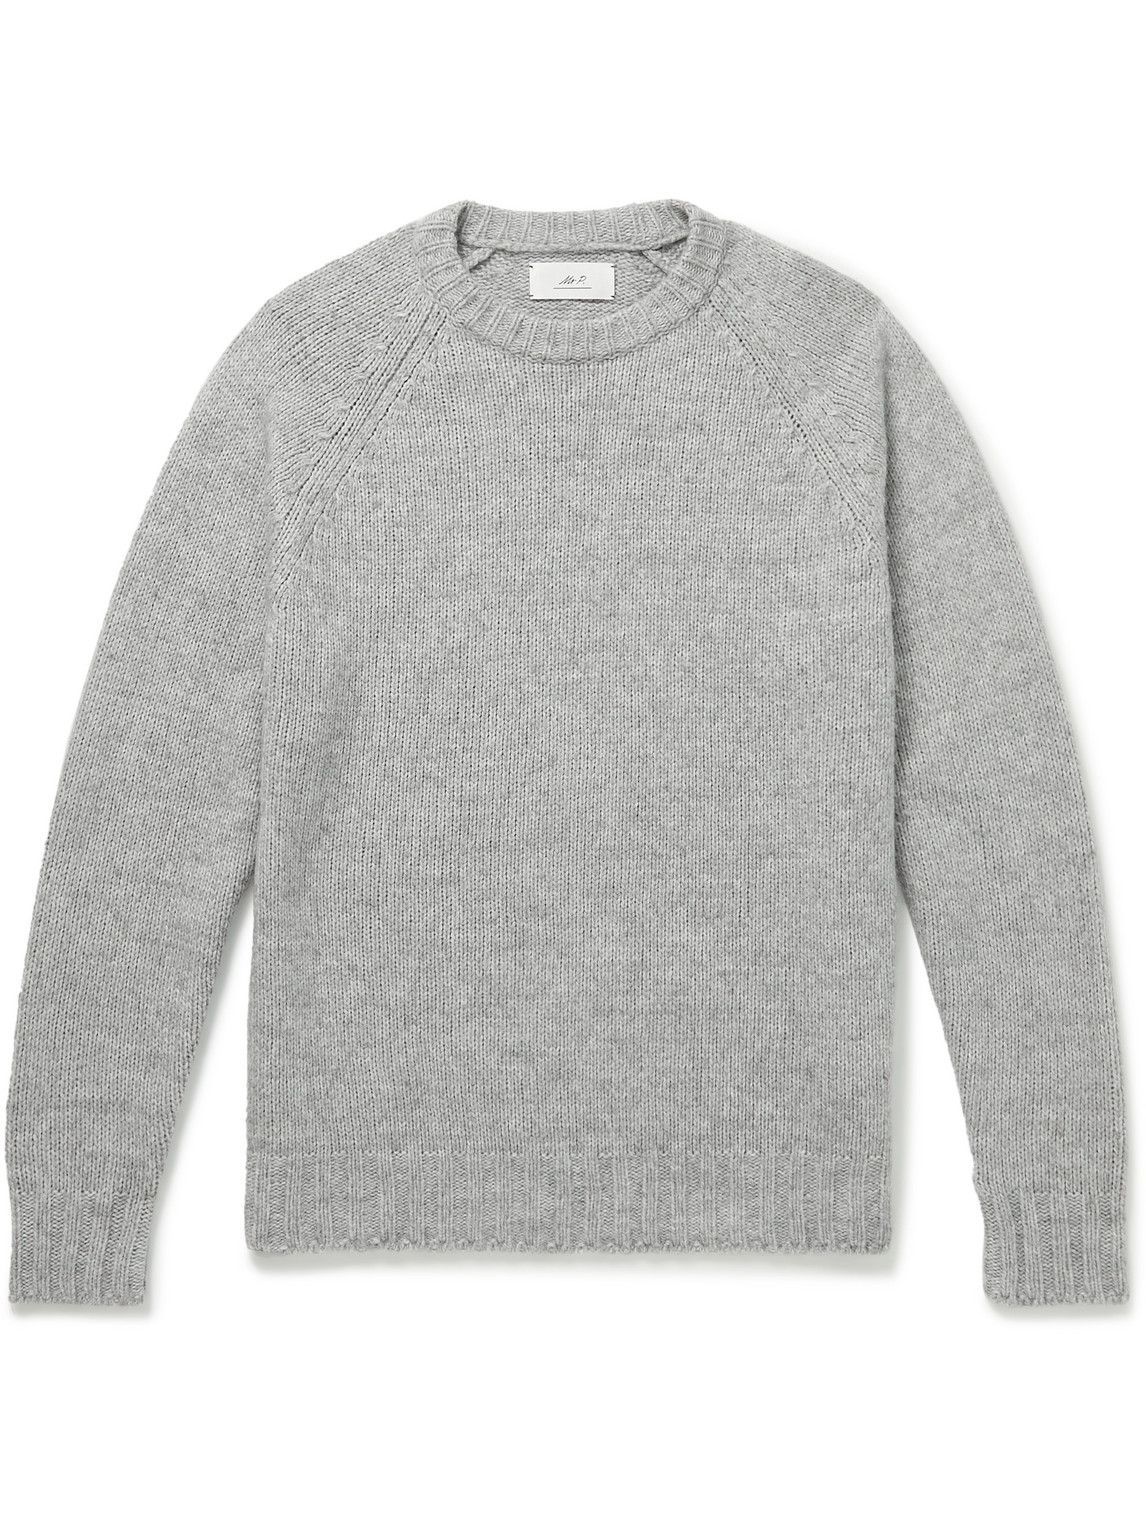 Mr P. - Ribbed-Knit Sweater - Gray Mr P.